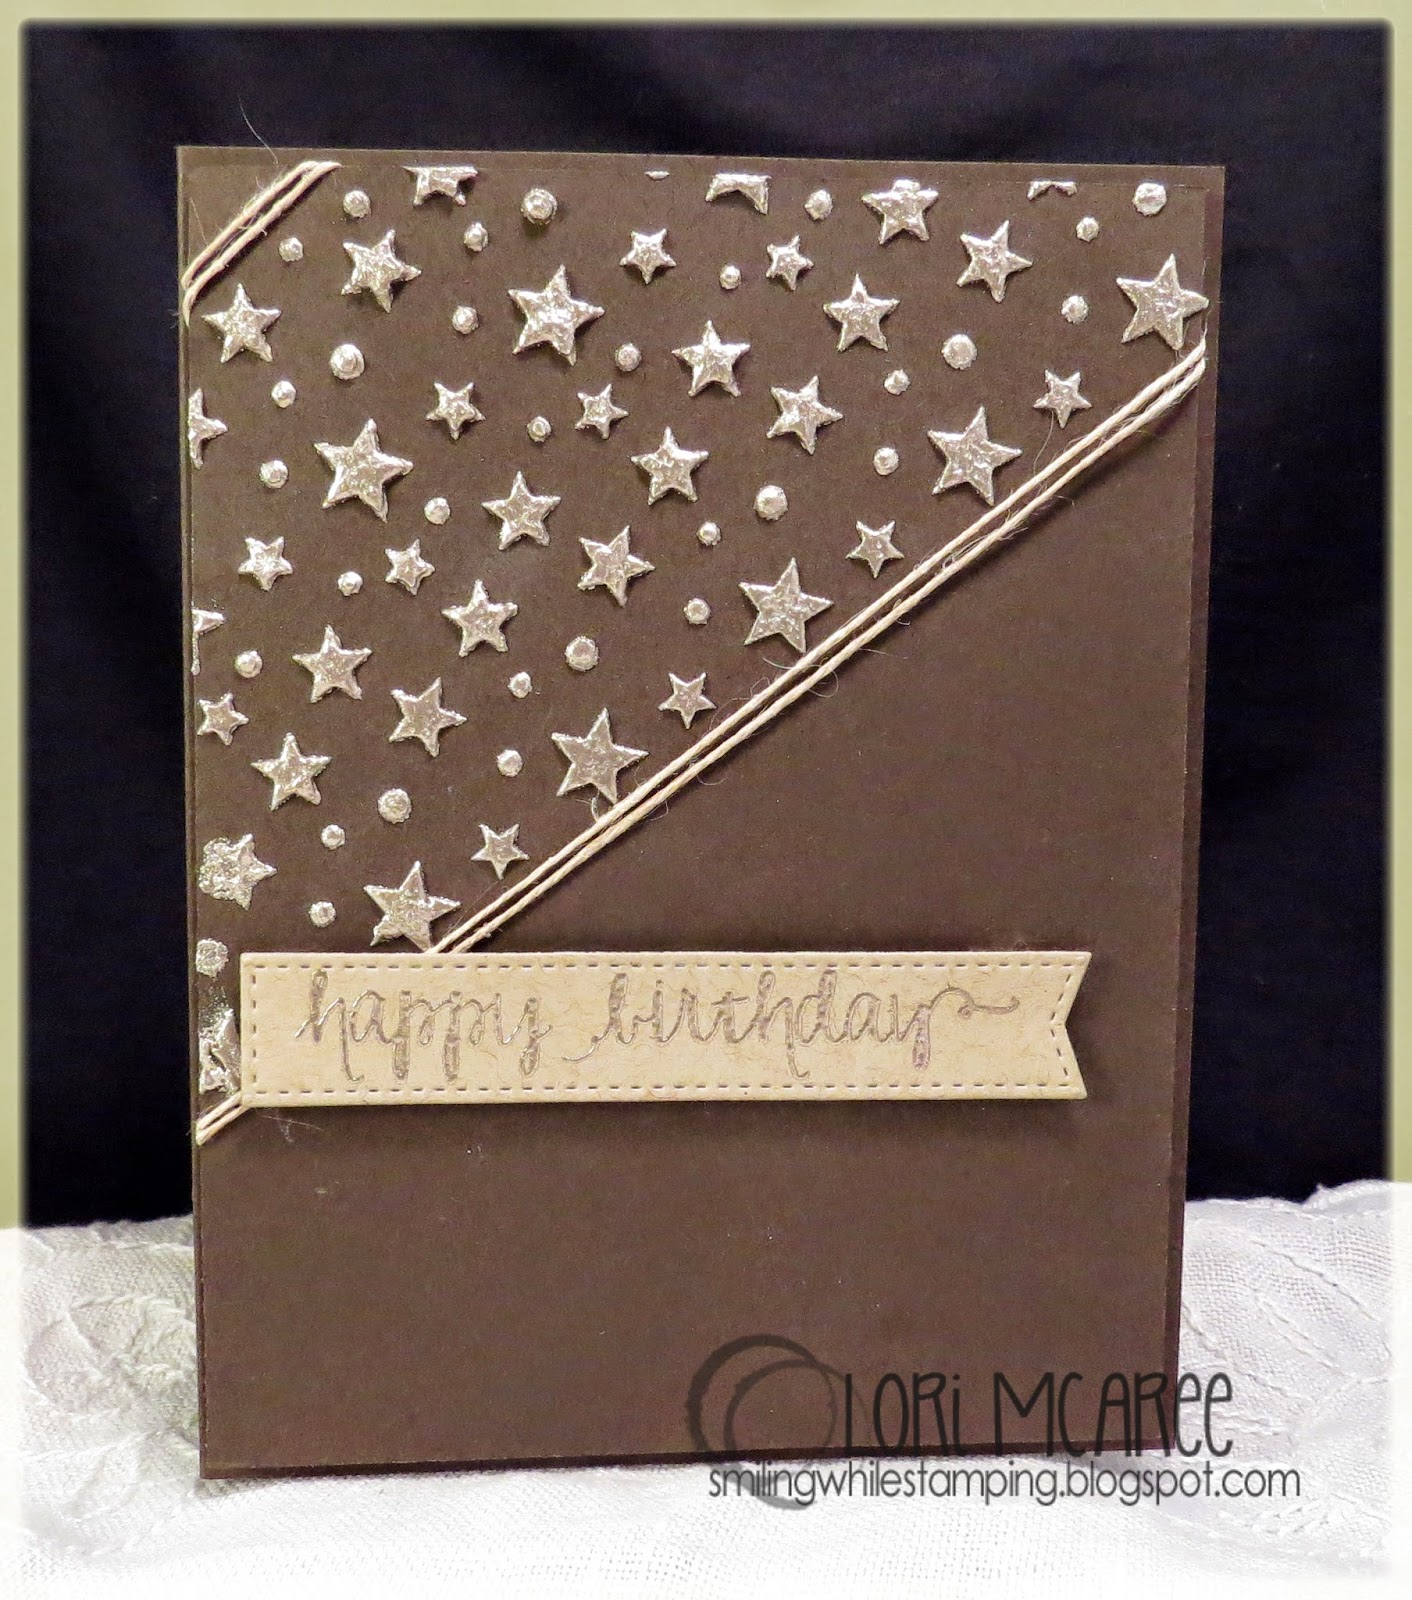 Smiling while Stamping: Starry Birthday